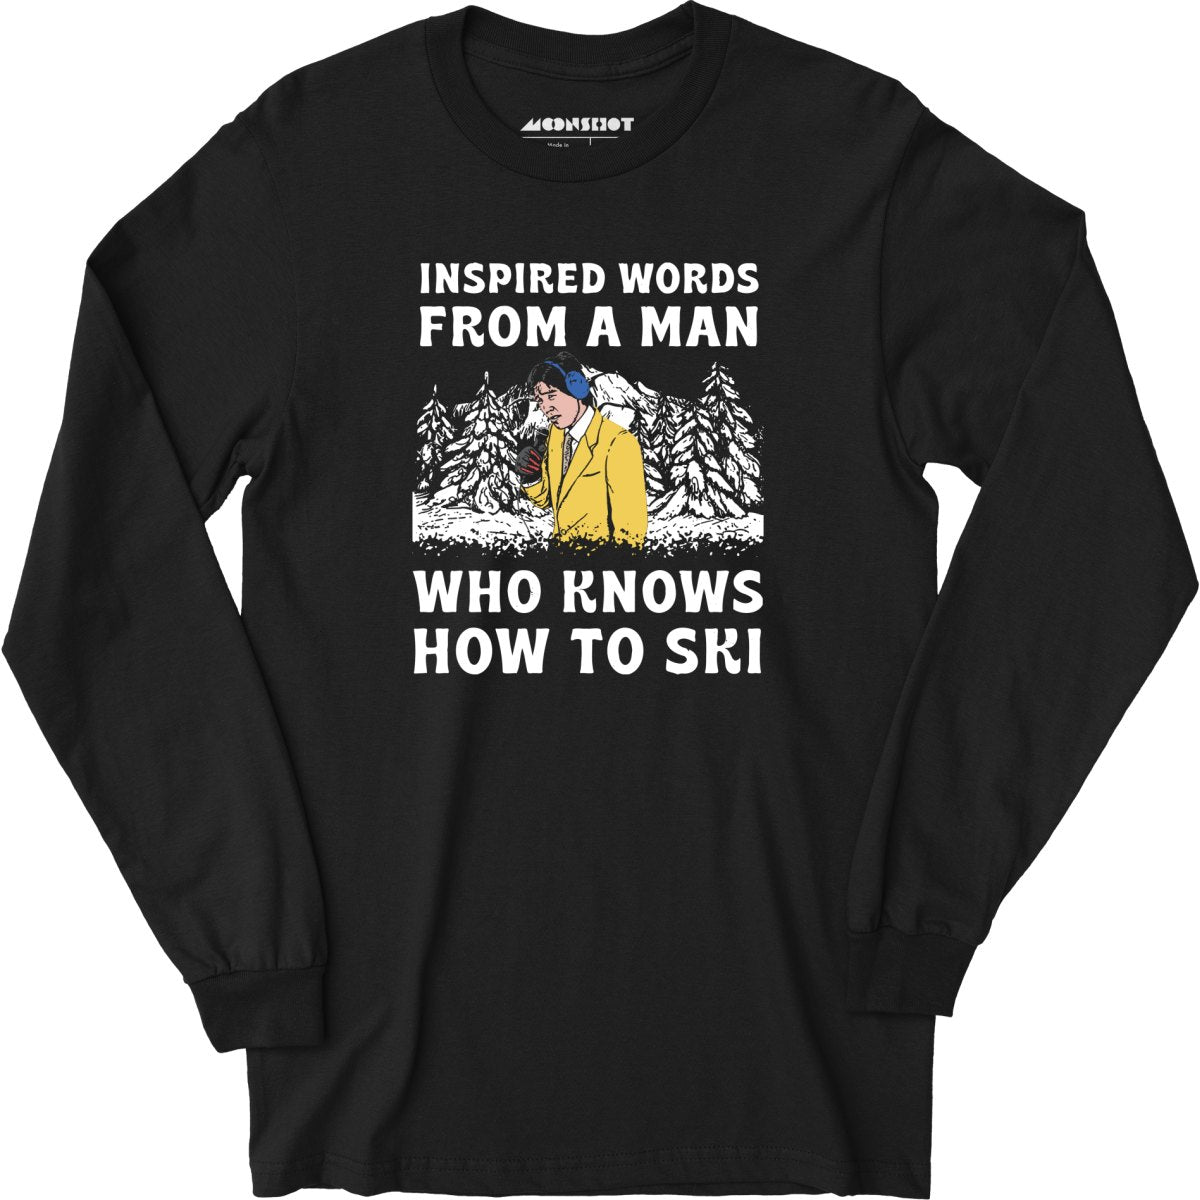 Inspired Words From a Man Who Knows How to Ski - Long Sleeve T-Shirt